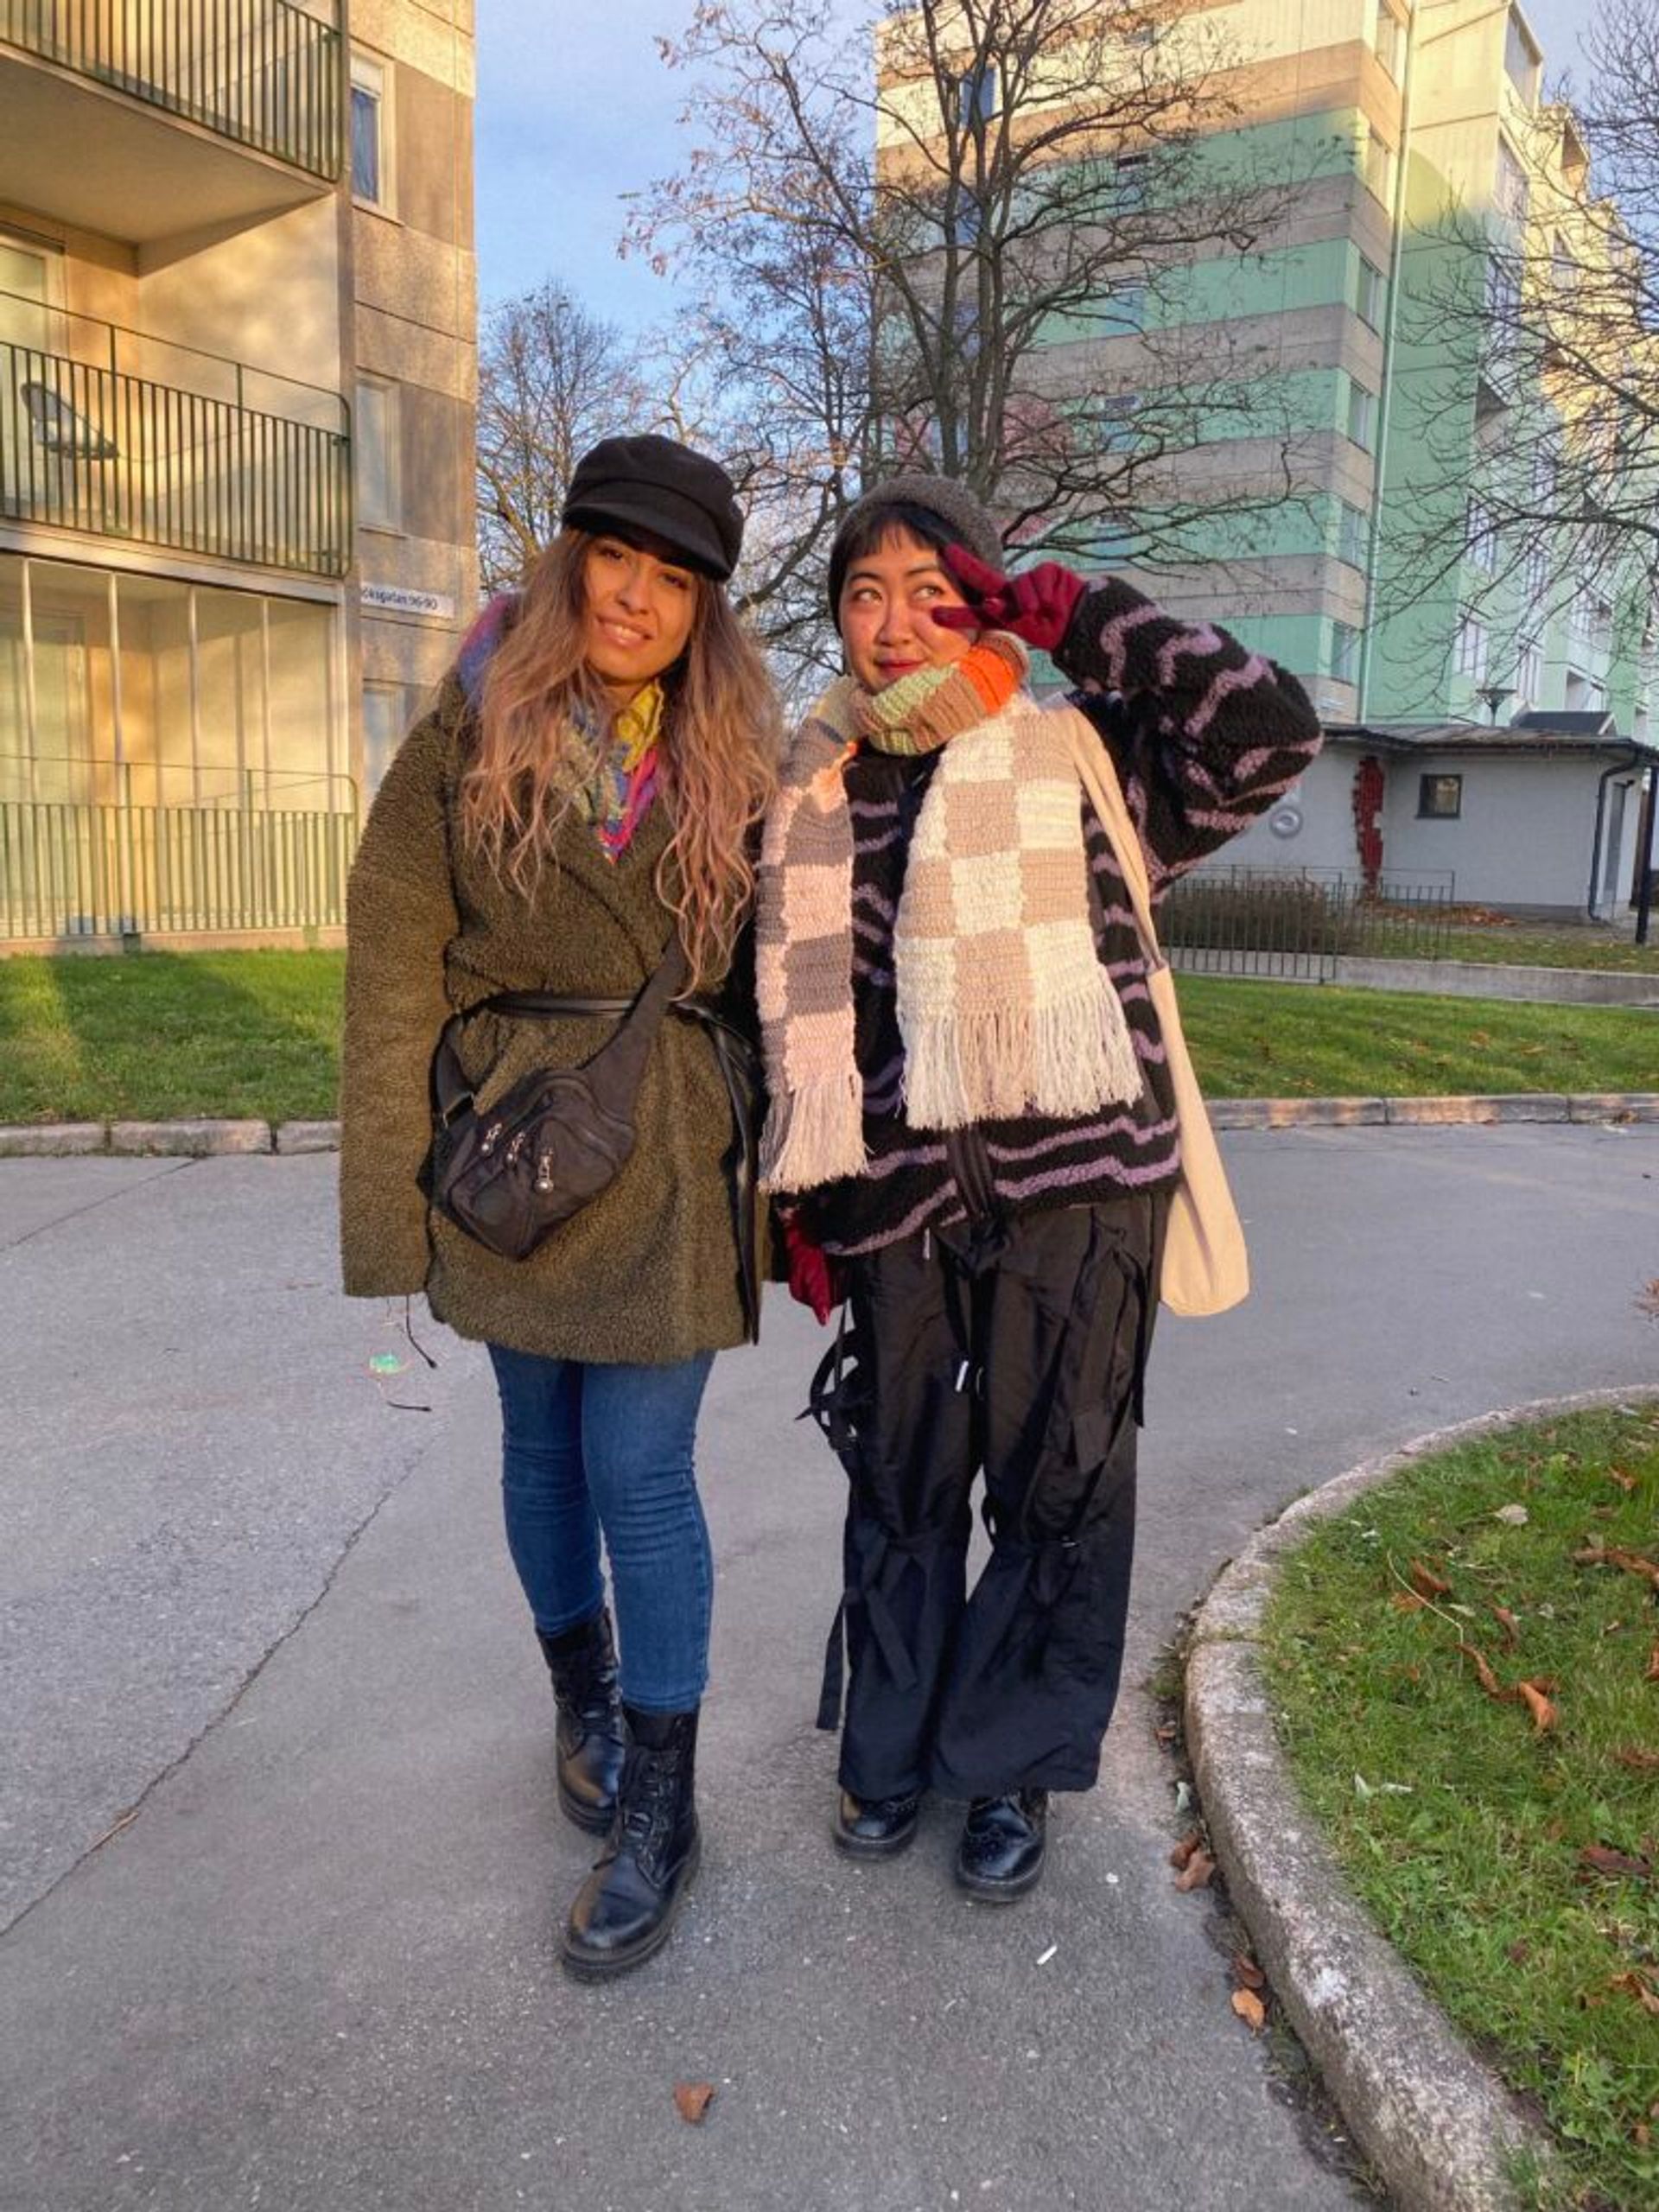 Two international students with colourful winter outfits